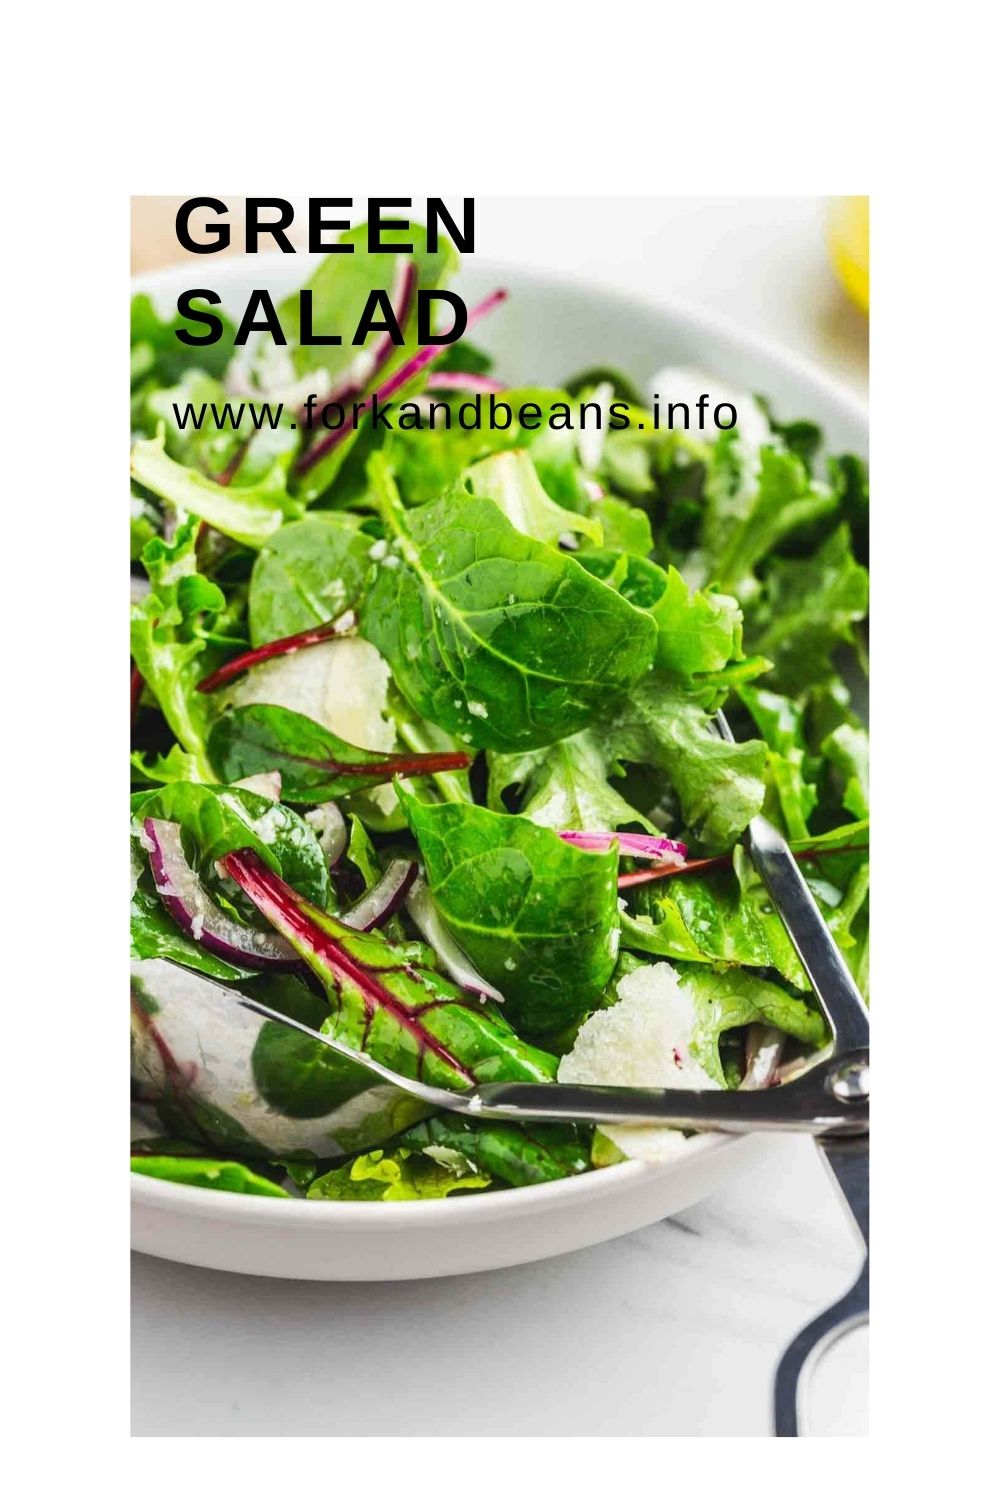 Simple Tossed Green Salad